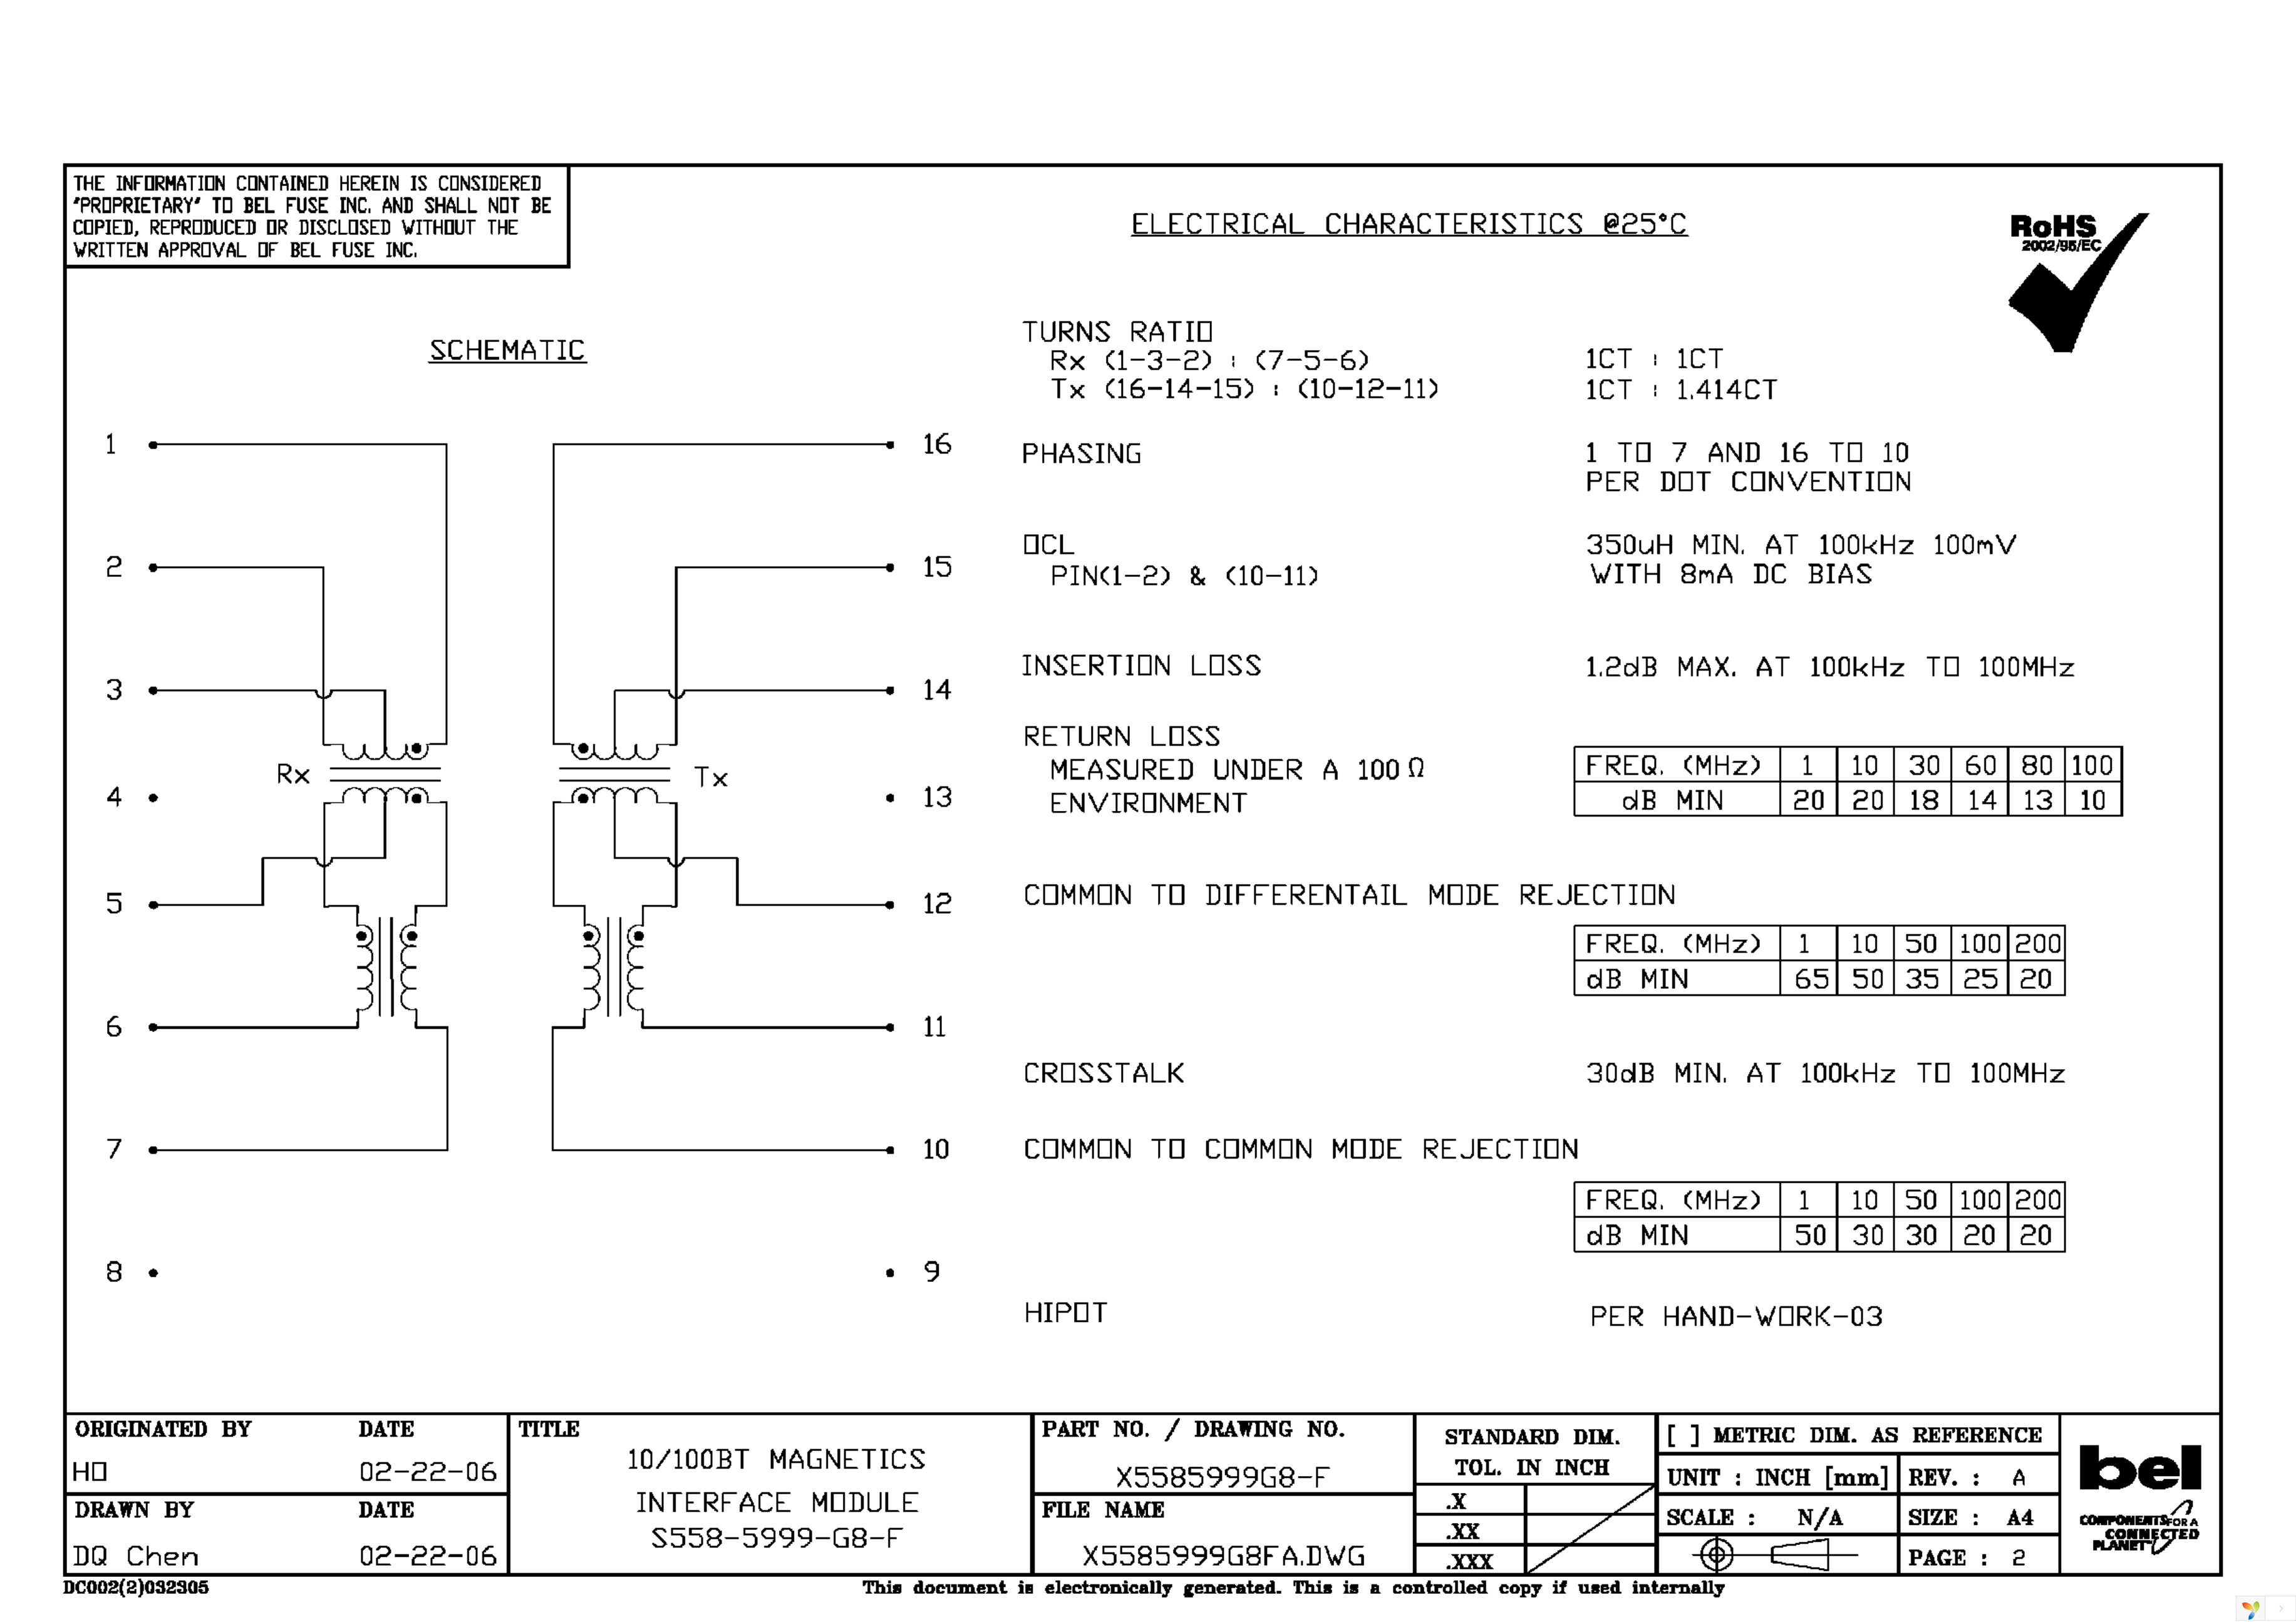 S558-5999-G8-F Page 1